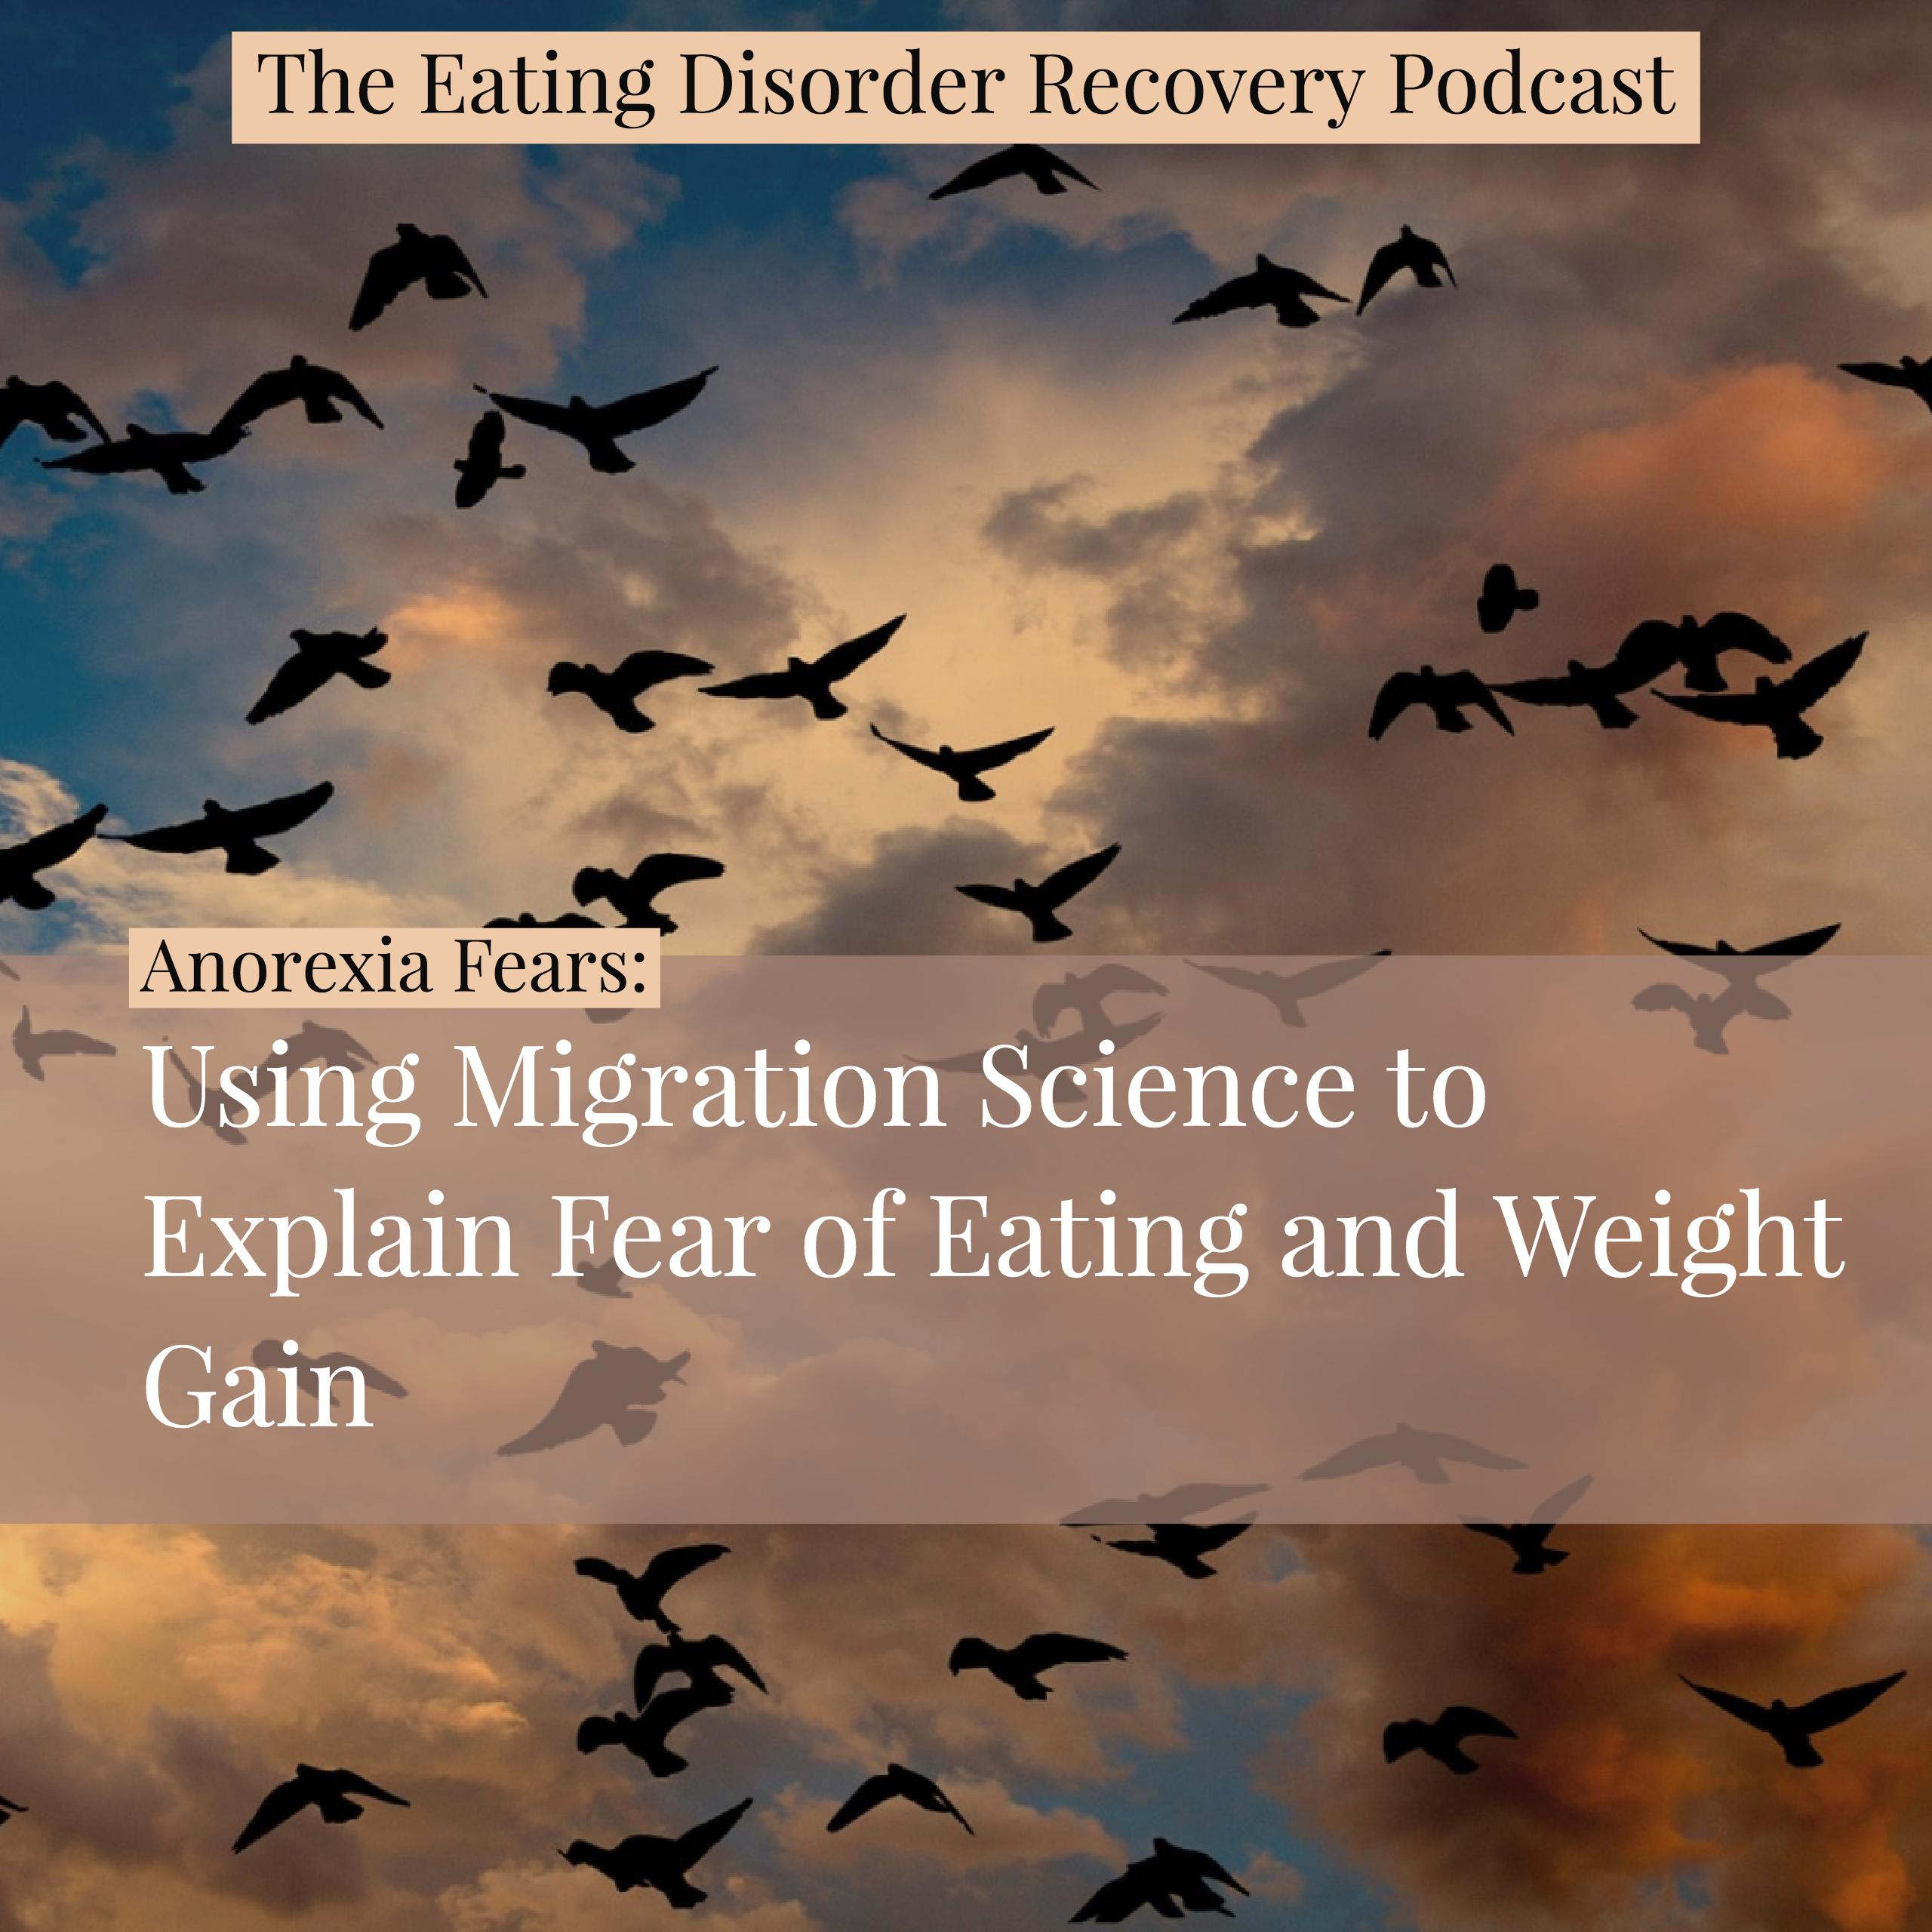 Anorexia Fears: Using Migration Science to Explain Fear of Eating and Weight Gain